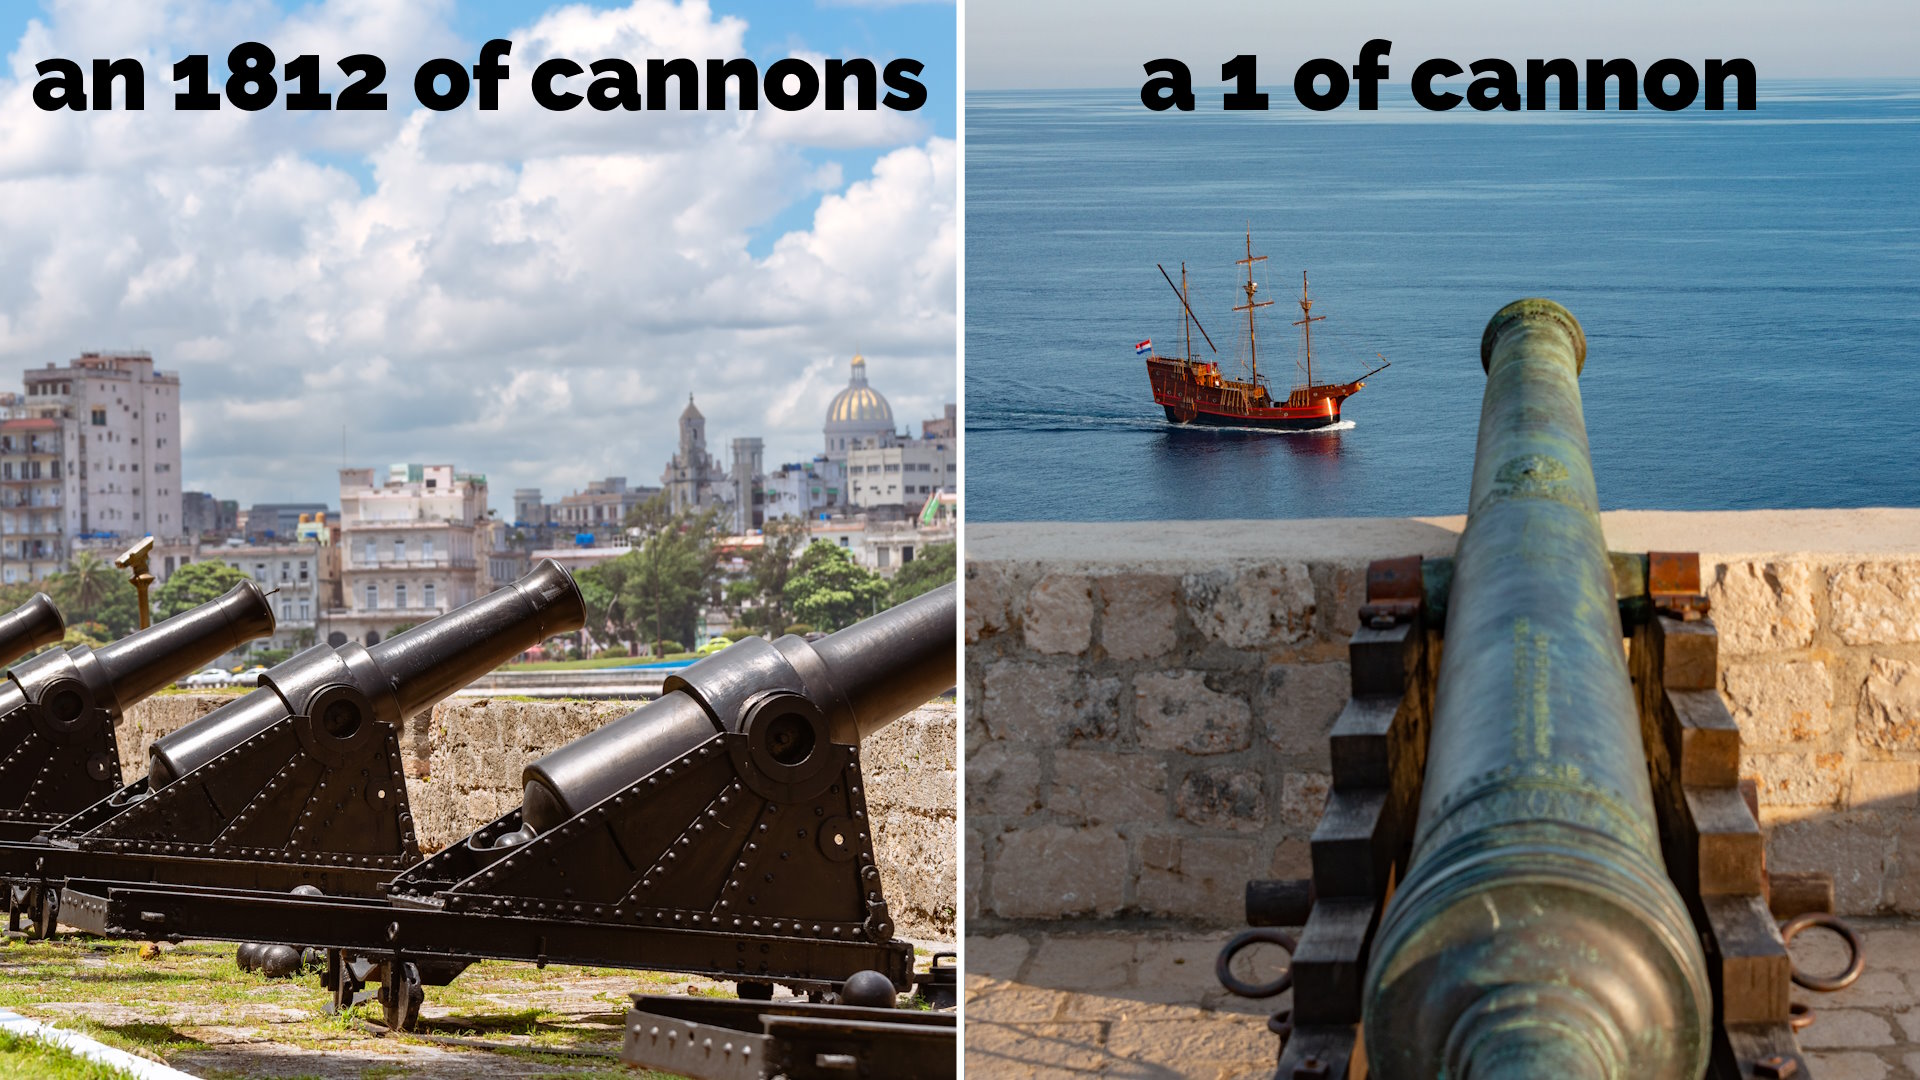 Captioned photos showing "an 1812 of CANNONS" and "a 1 of CANNON".